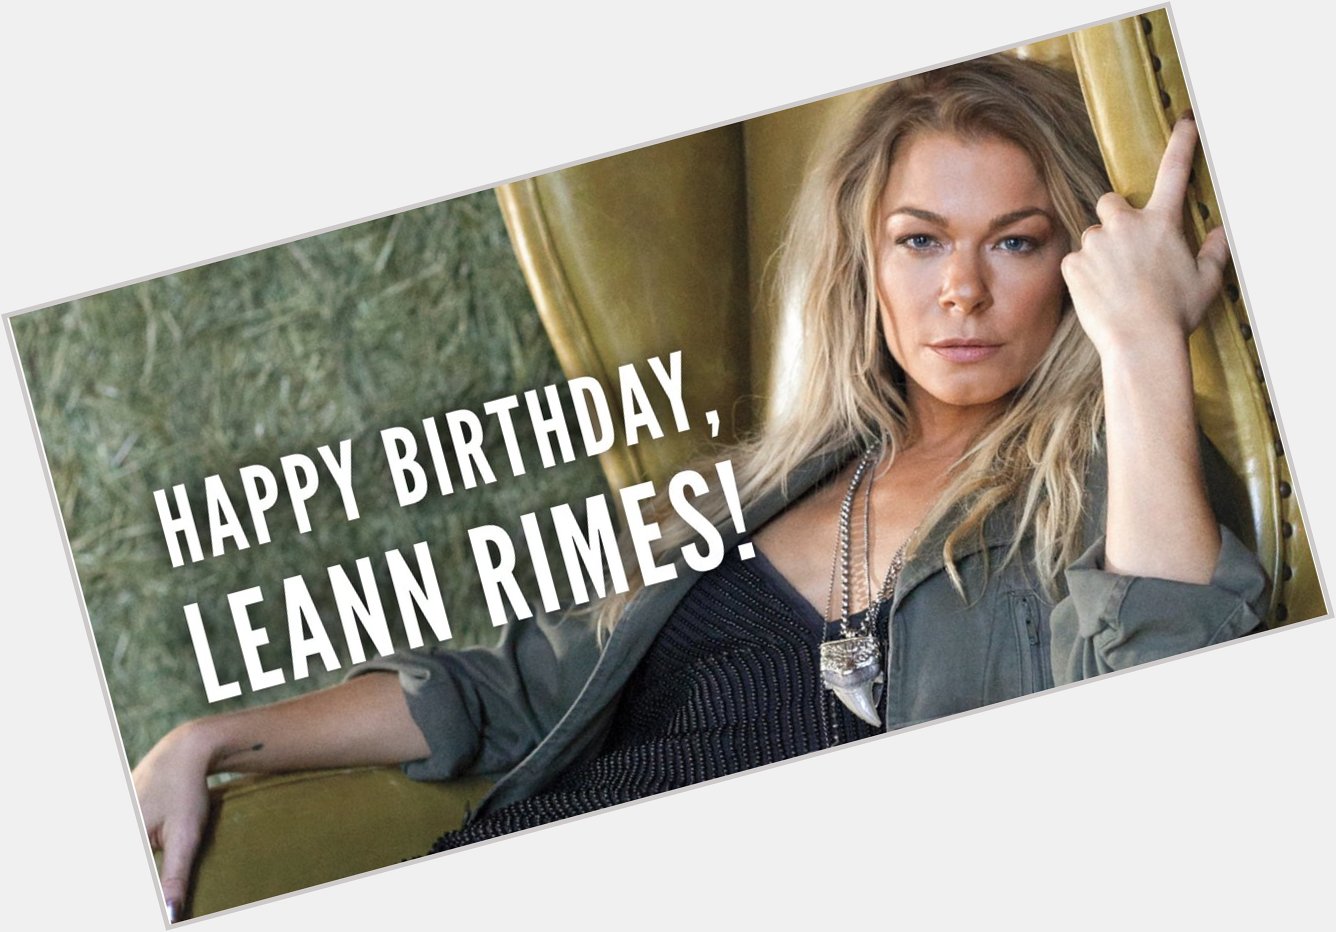 Happy Birthday to LeAnn Rimes! What s your favorite hit of hers?  